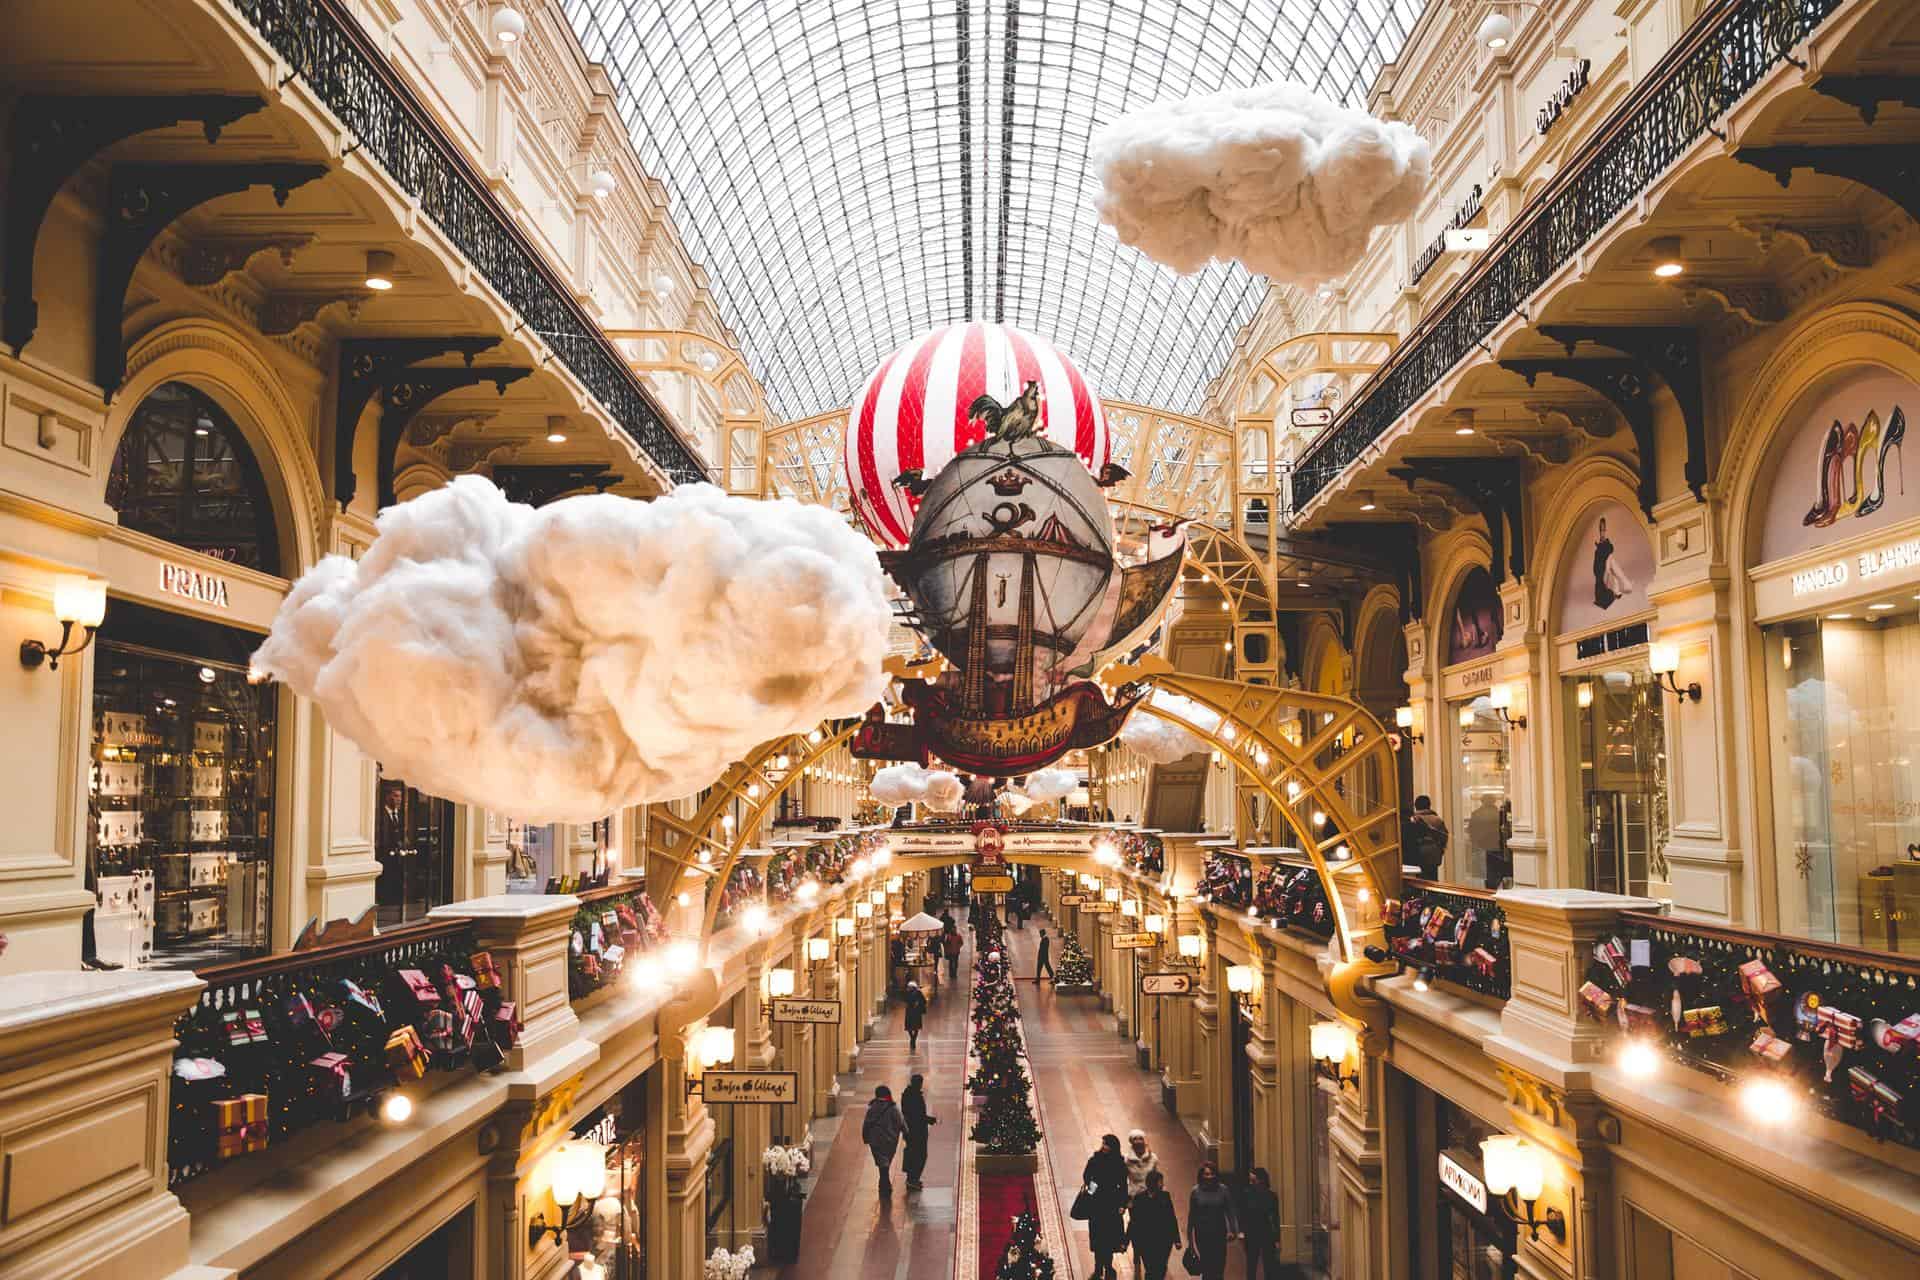 Shopping in Moscow is filled with fun activities